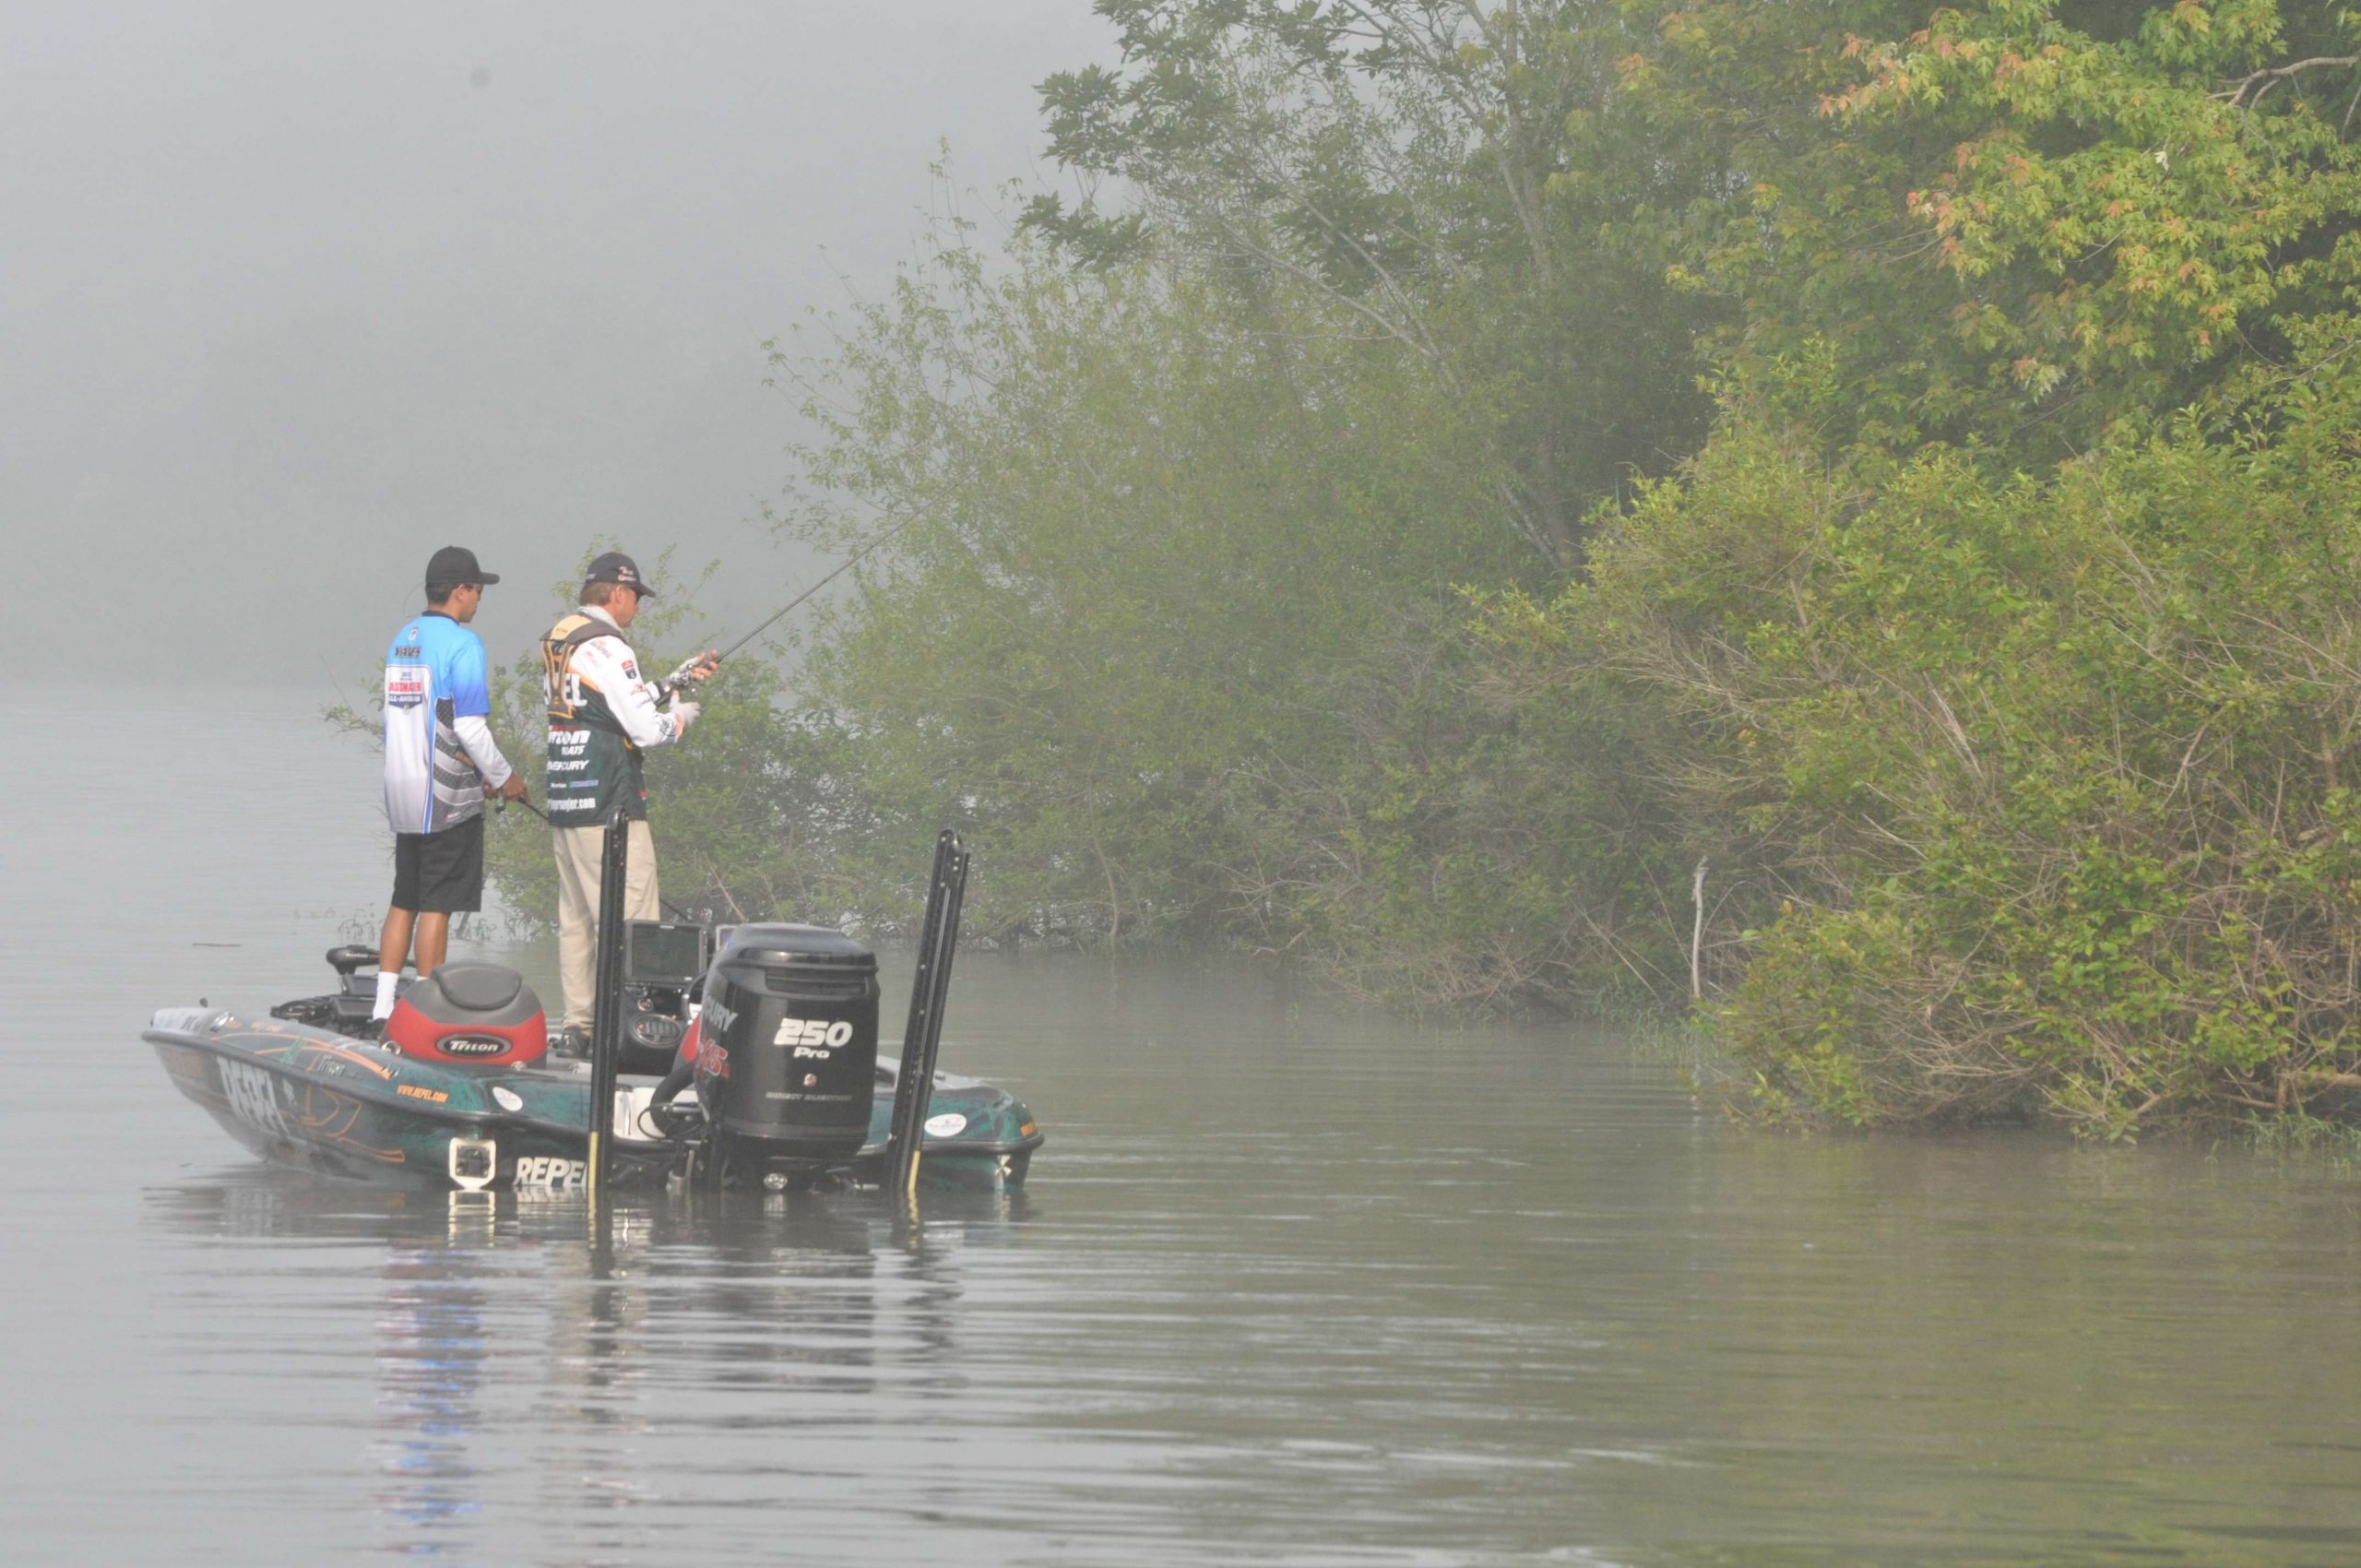 With heavy fog, Klein and Yates start flipping a nearby island.